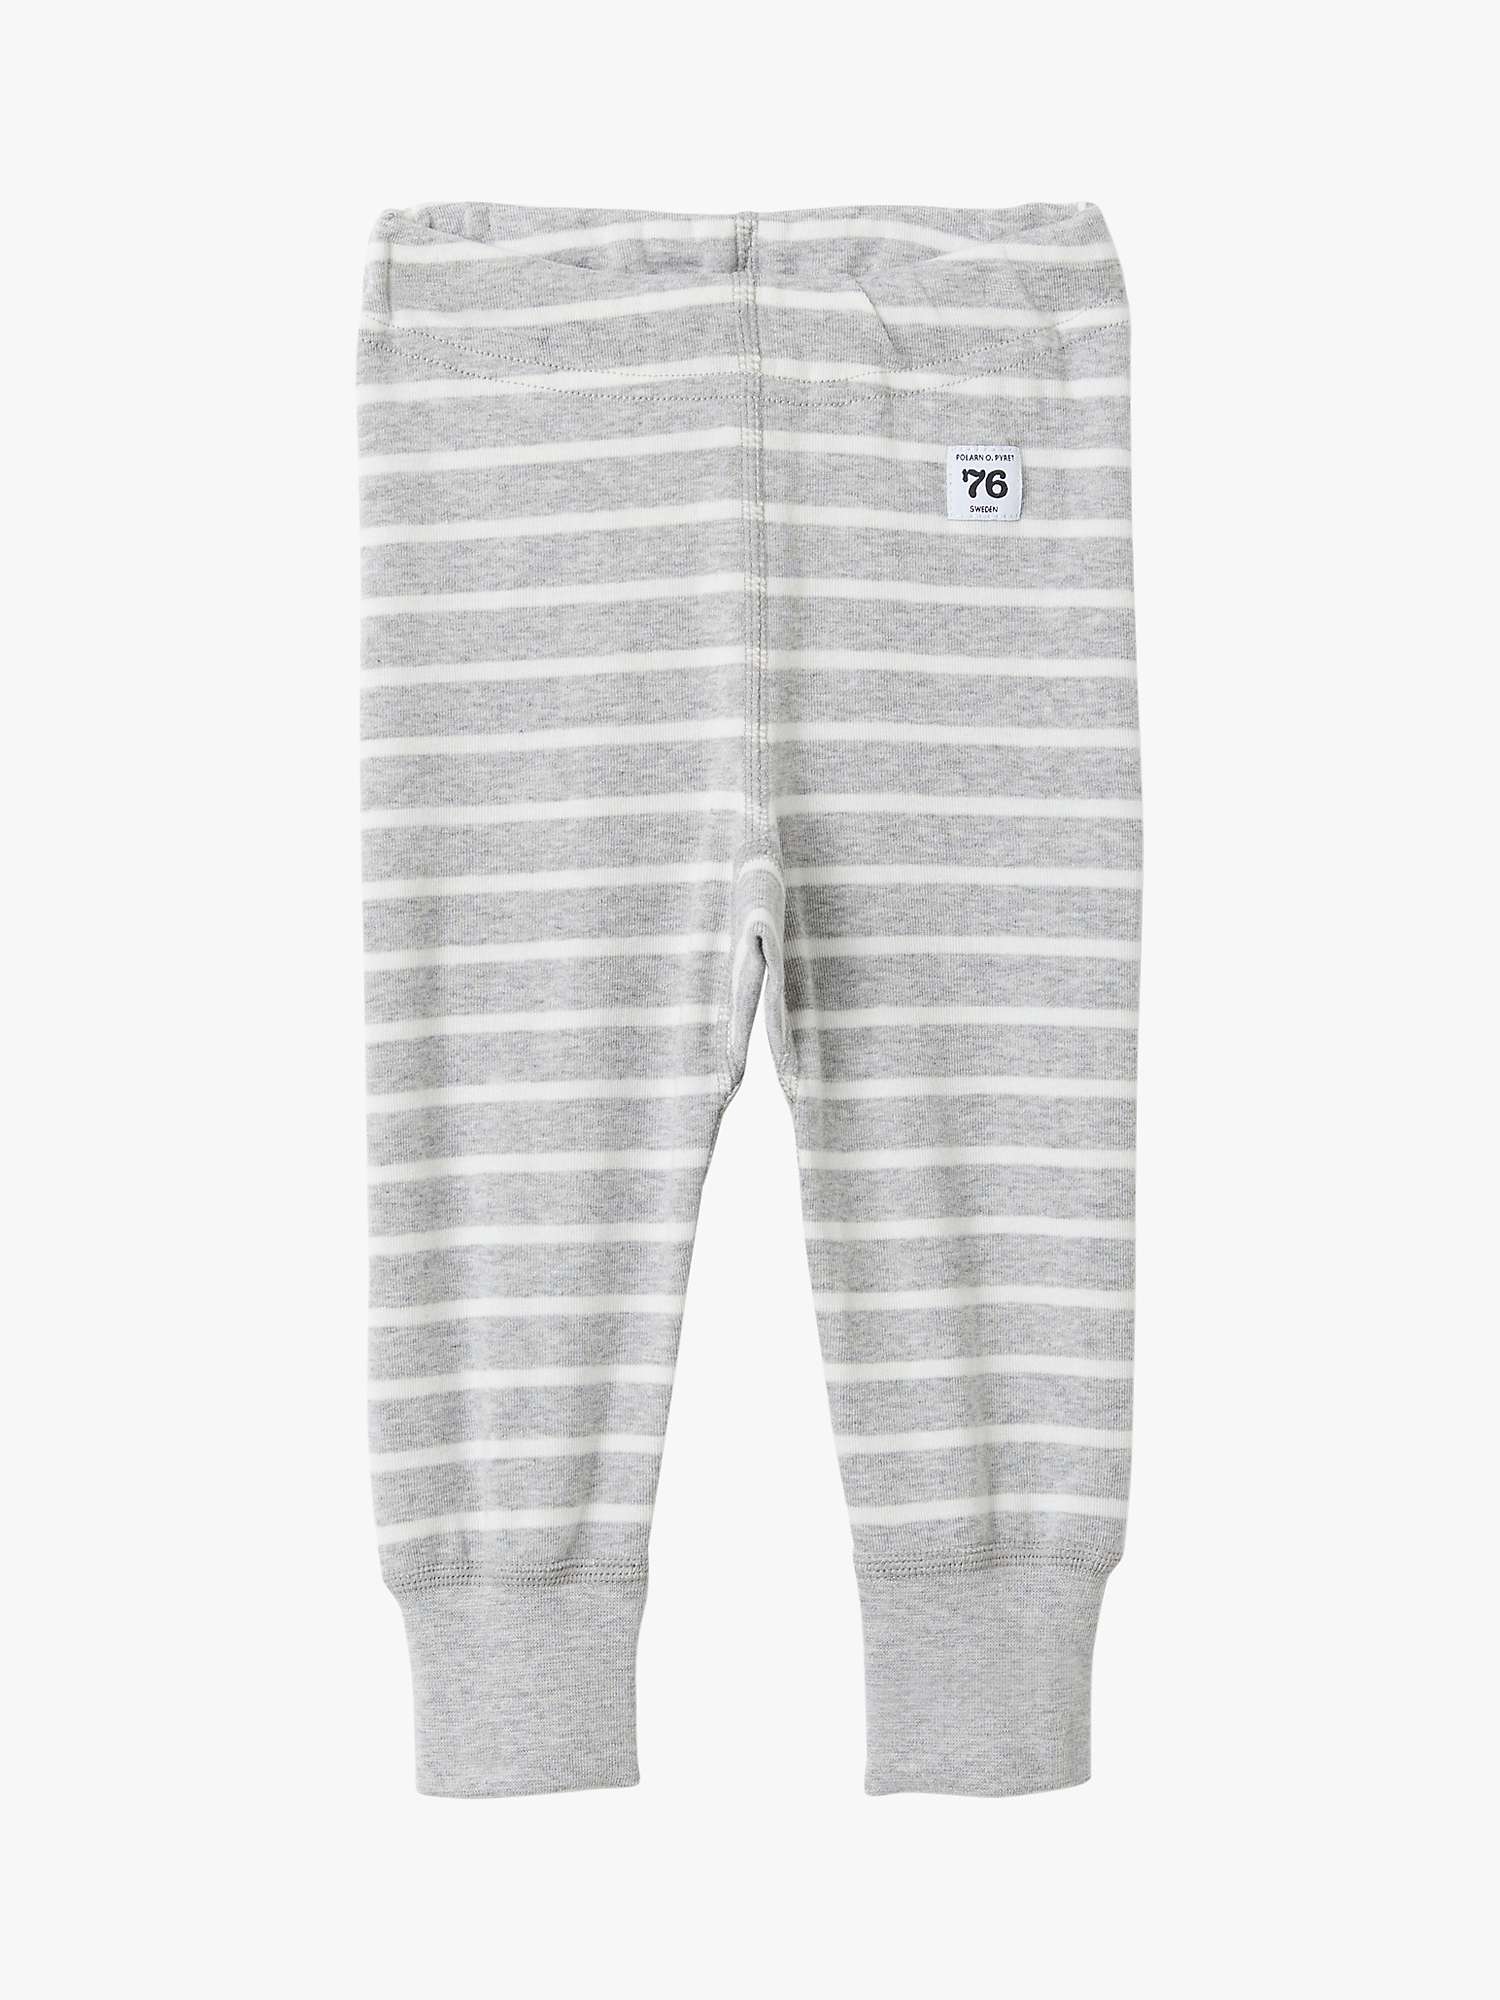 Buy Polarn O. Pyret Baby Organic Cotton Stripe Trousers Online at johnlewis.com